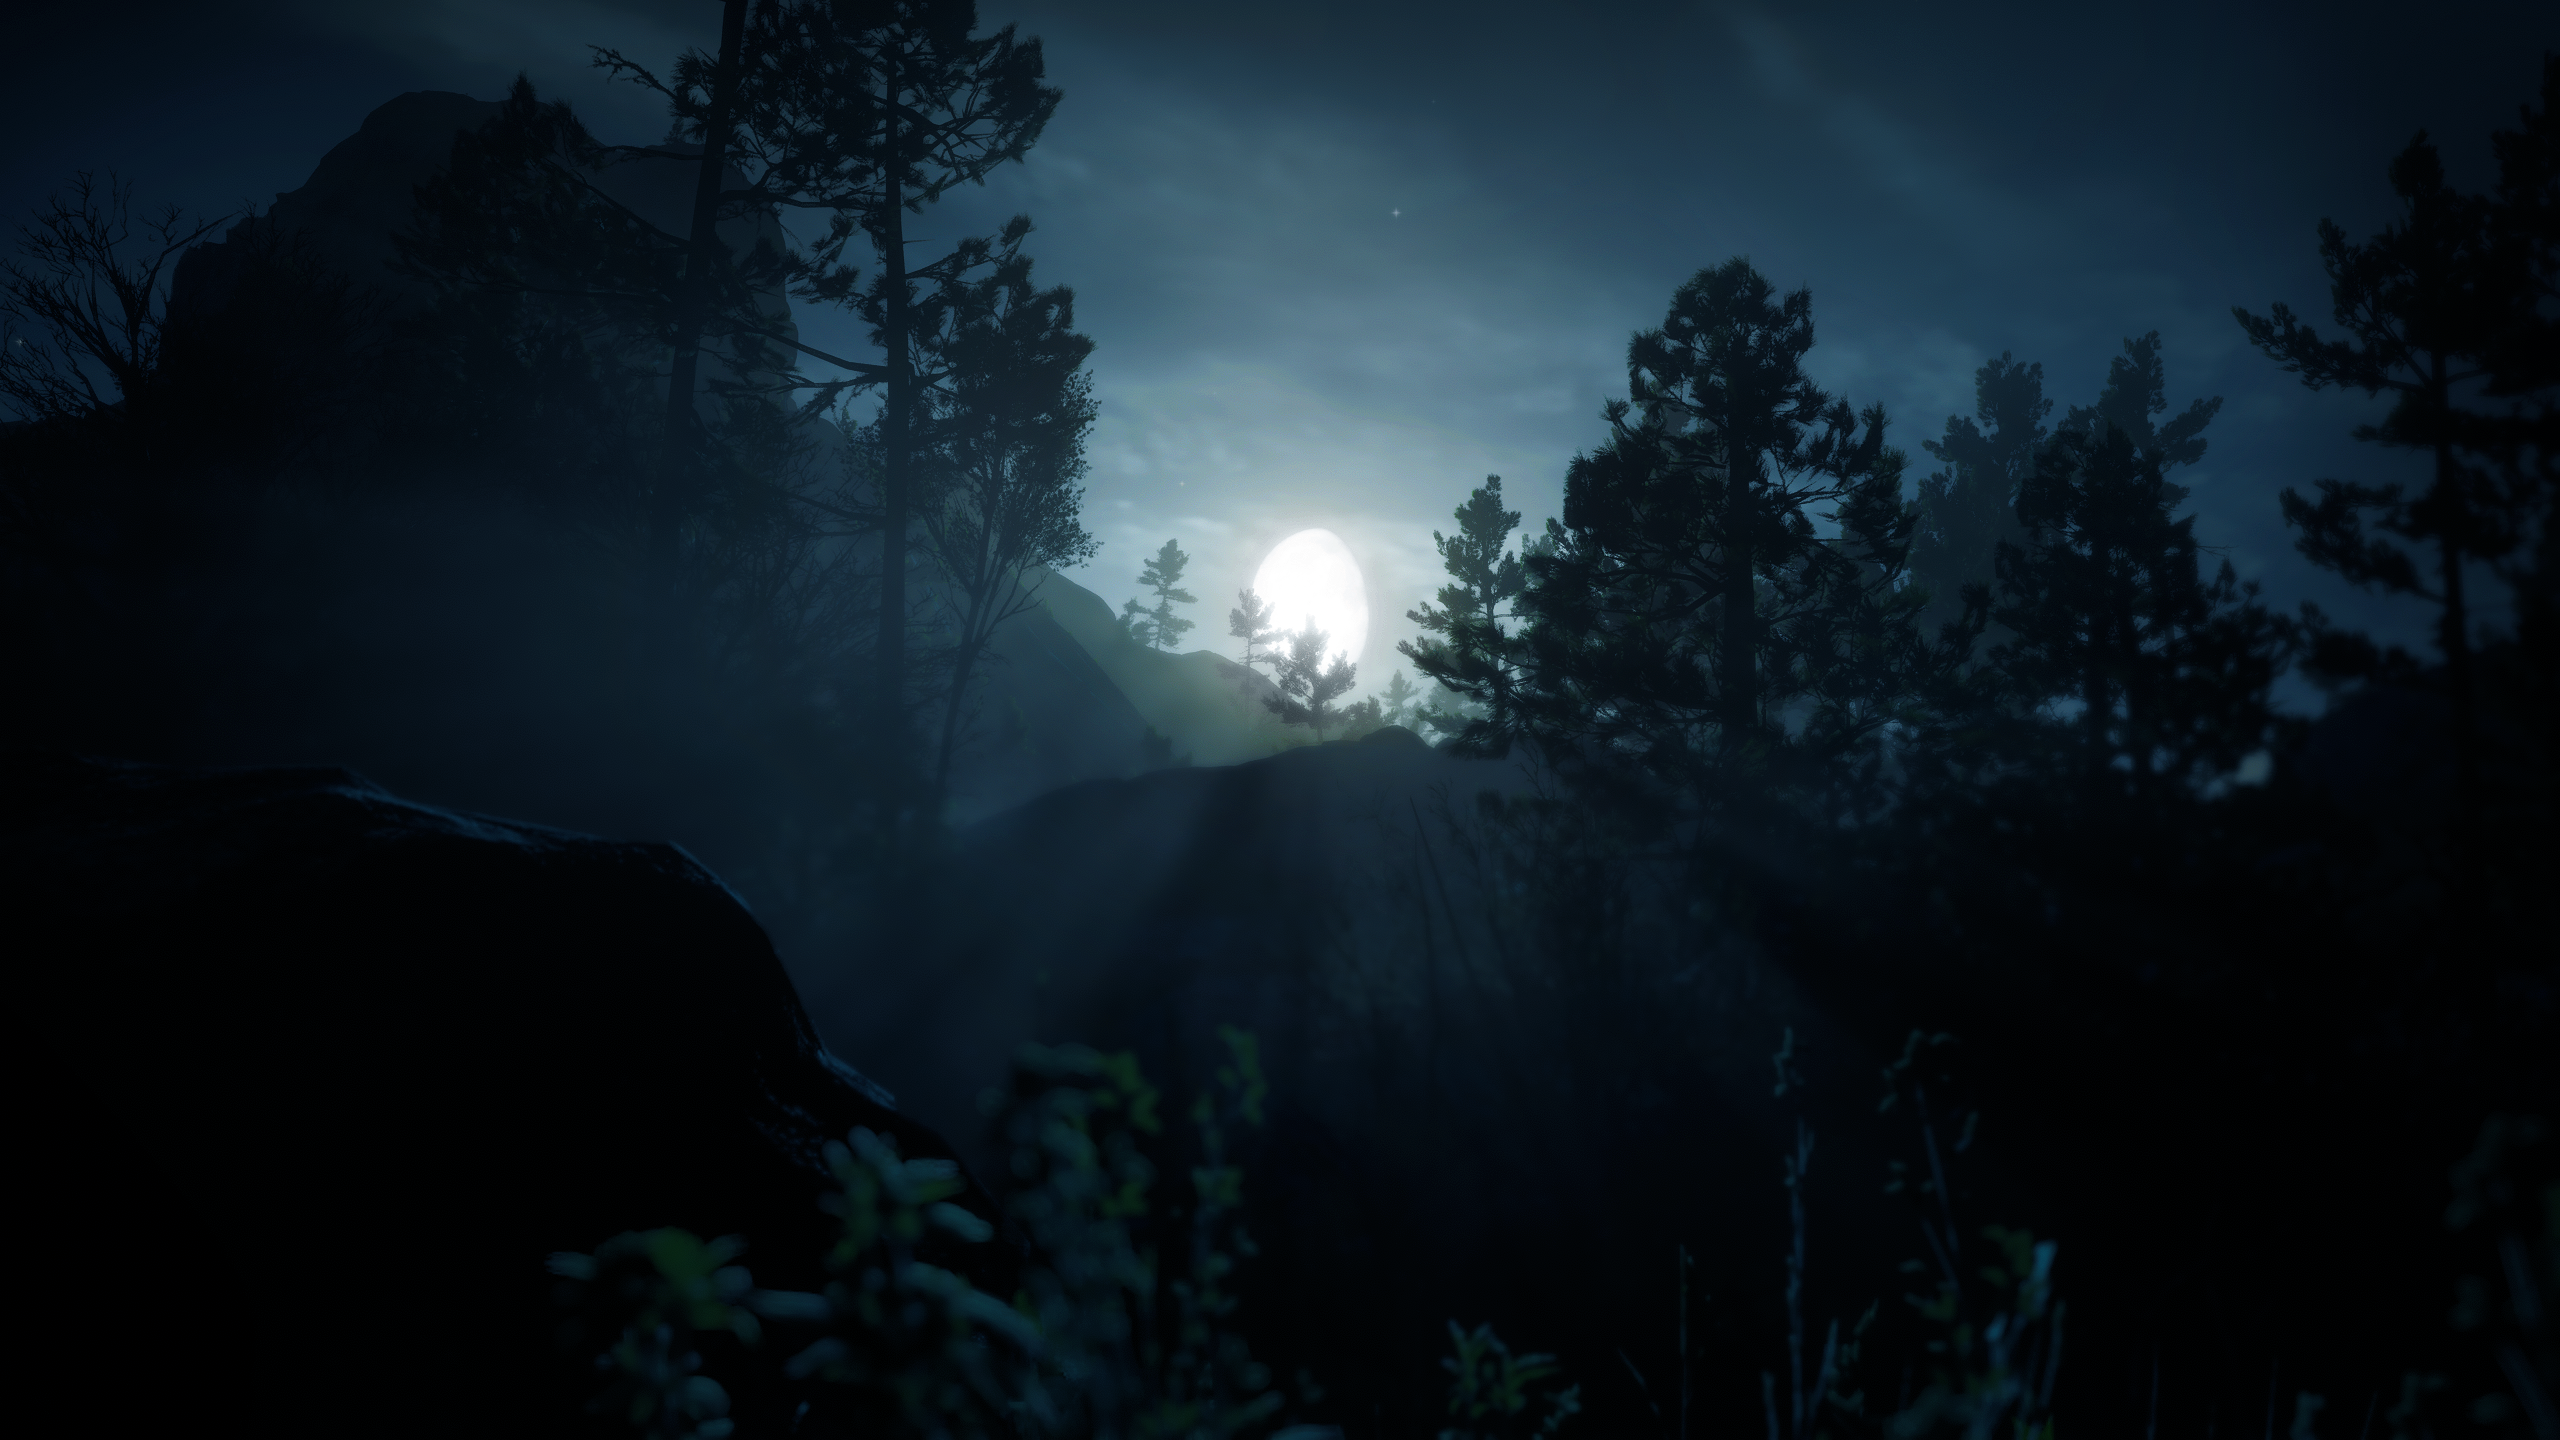 General 2560x1440 moon rays nature Red Dead Redemption 2 mist video game art video games night Moon moonlight sky clouds trees